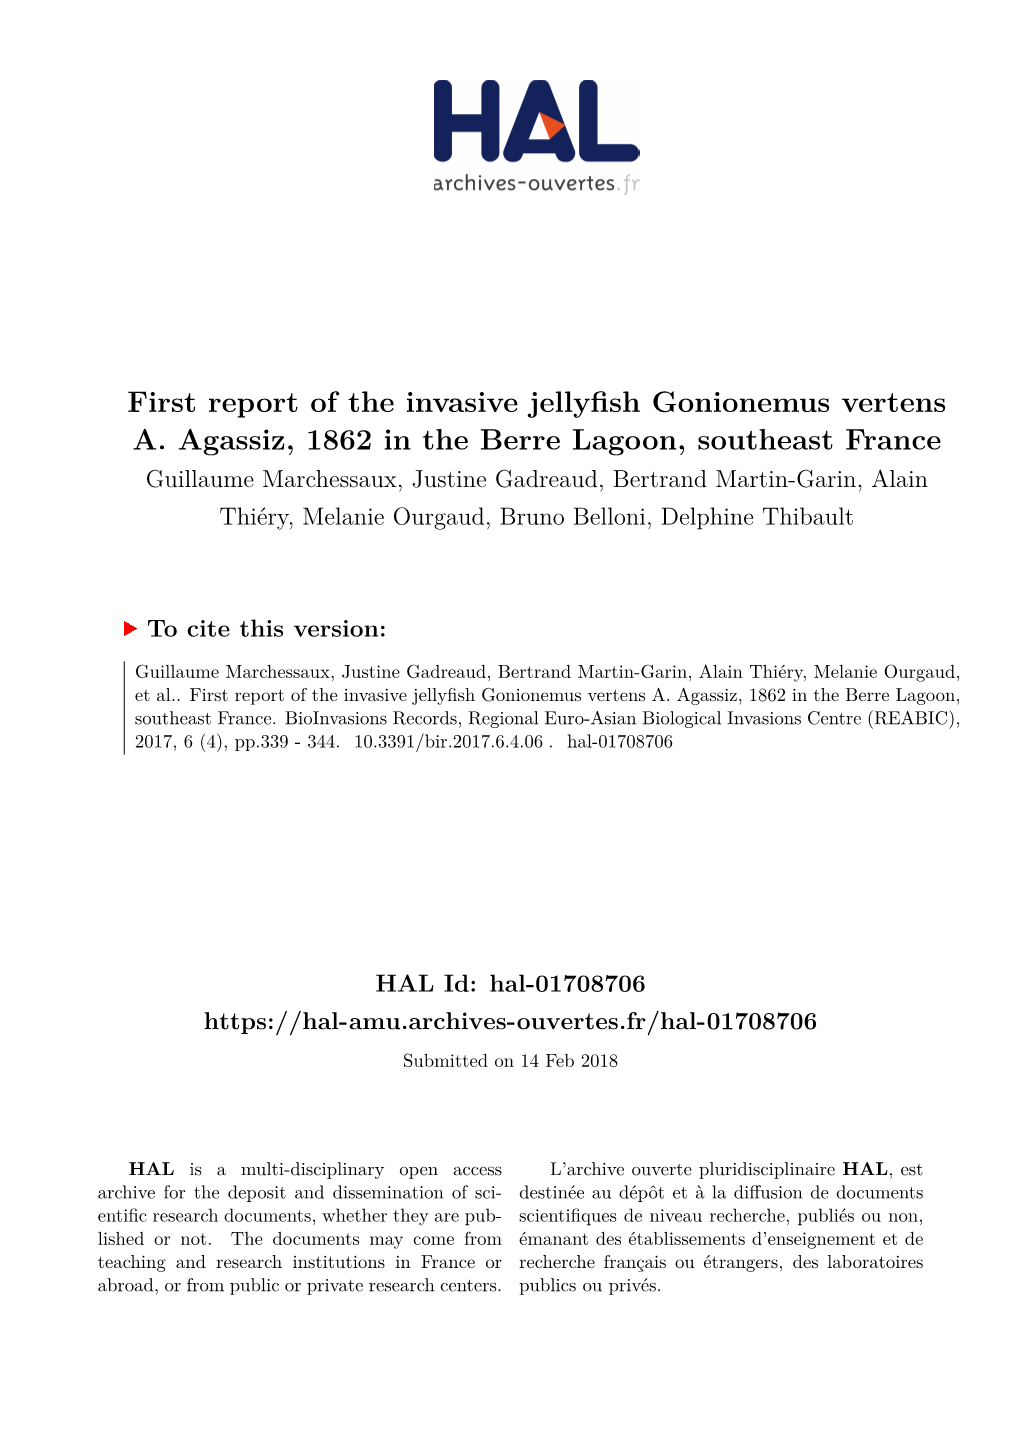 First Report of the Invasive Jellyfish Gonionemus Vertens A. Agassiz